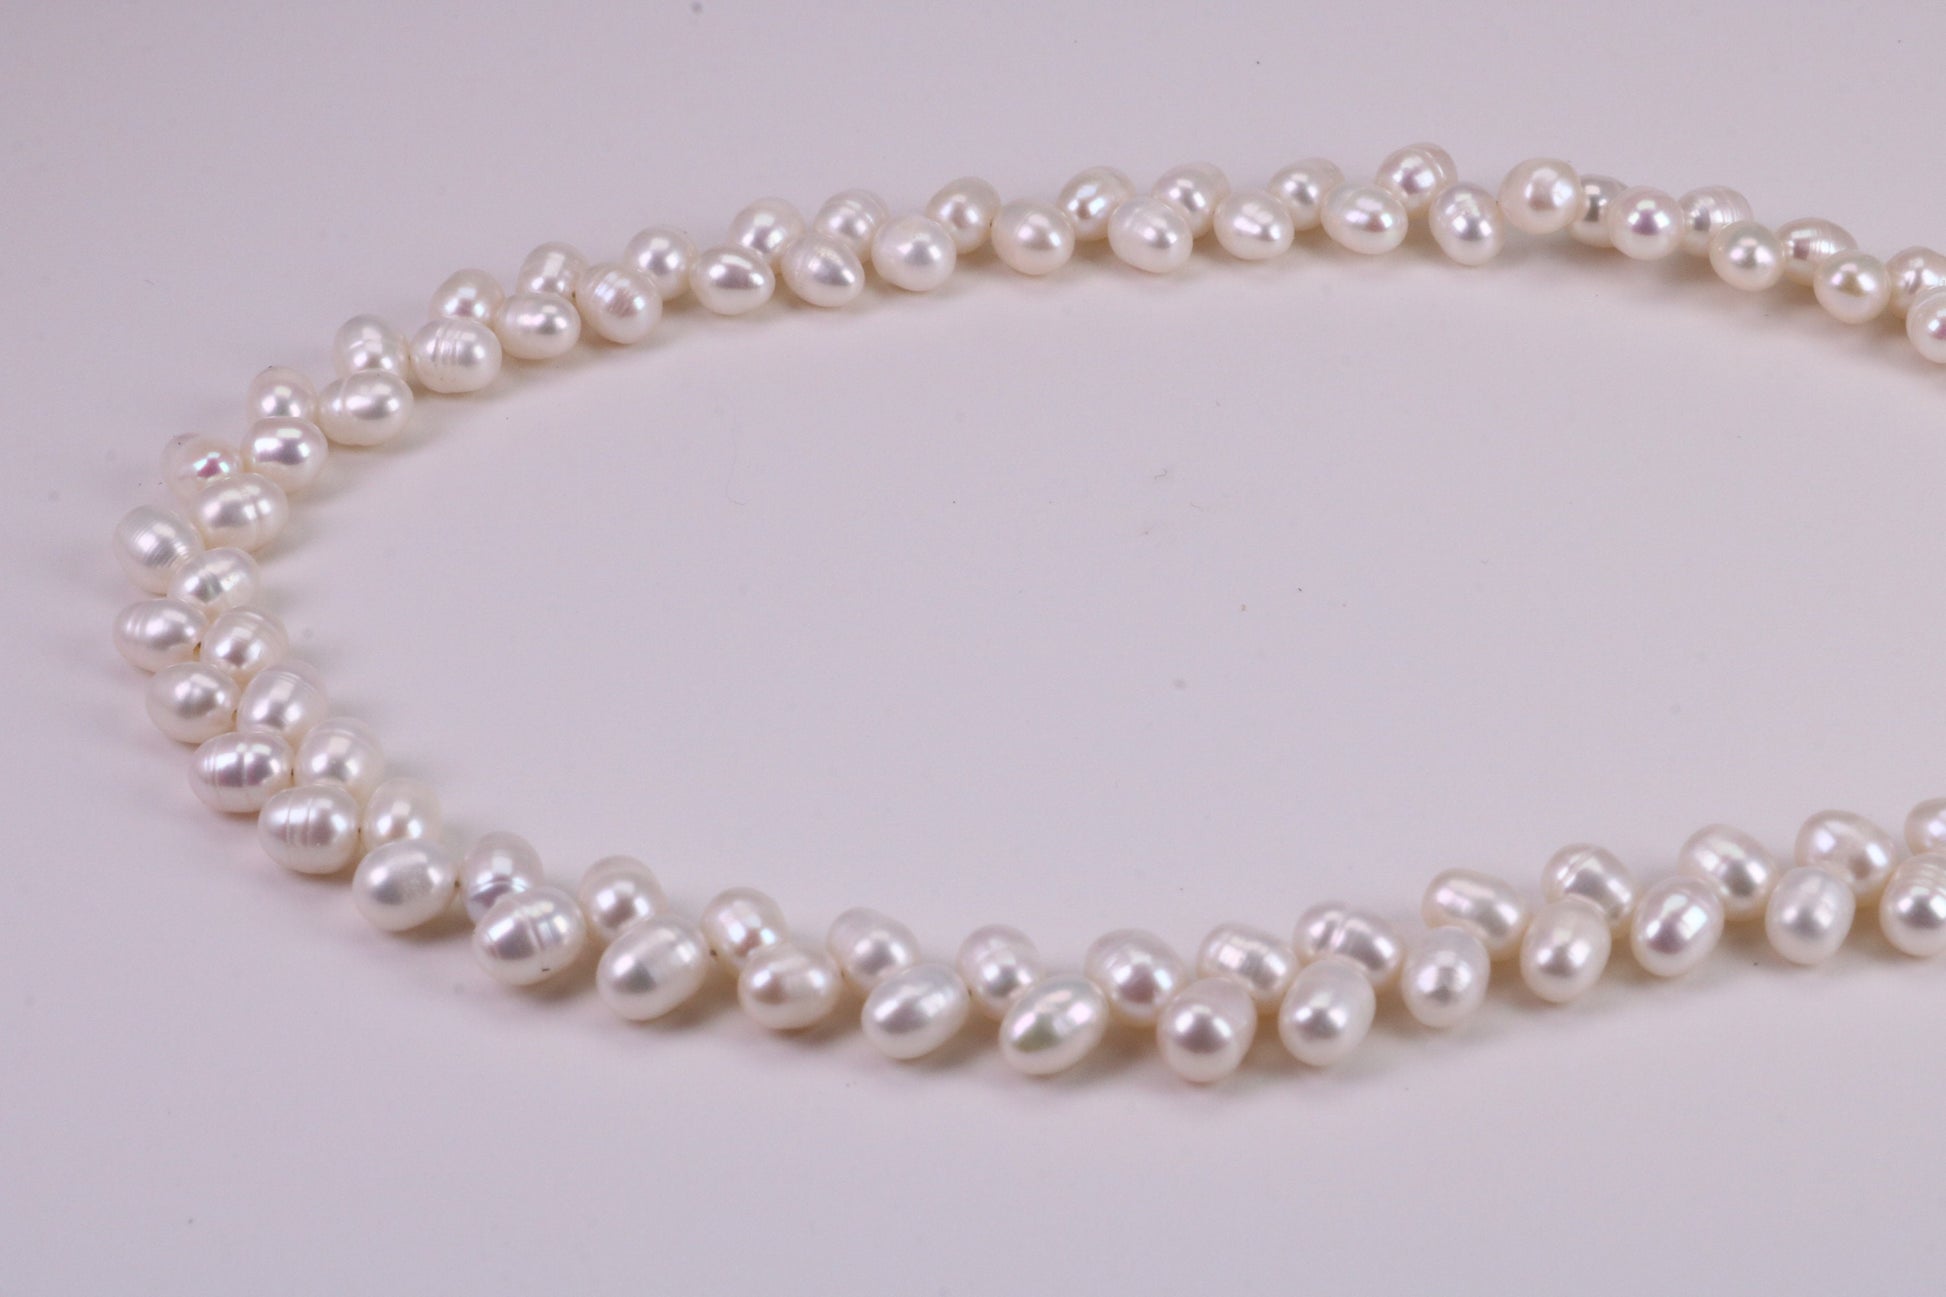 Natural 5 mm Rice Pearl Necklace set in Silver, Double Stranded and Measures 16 inches Long